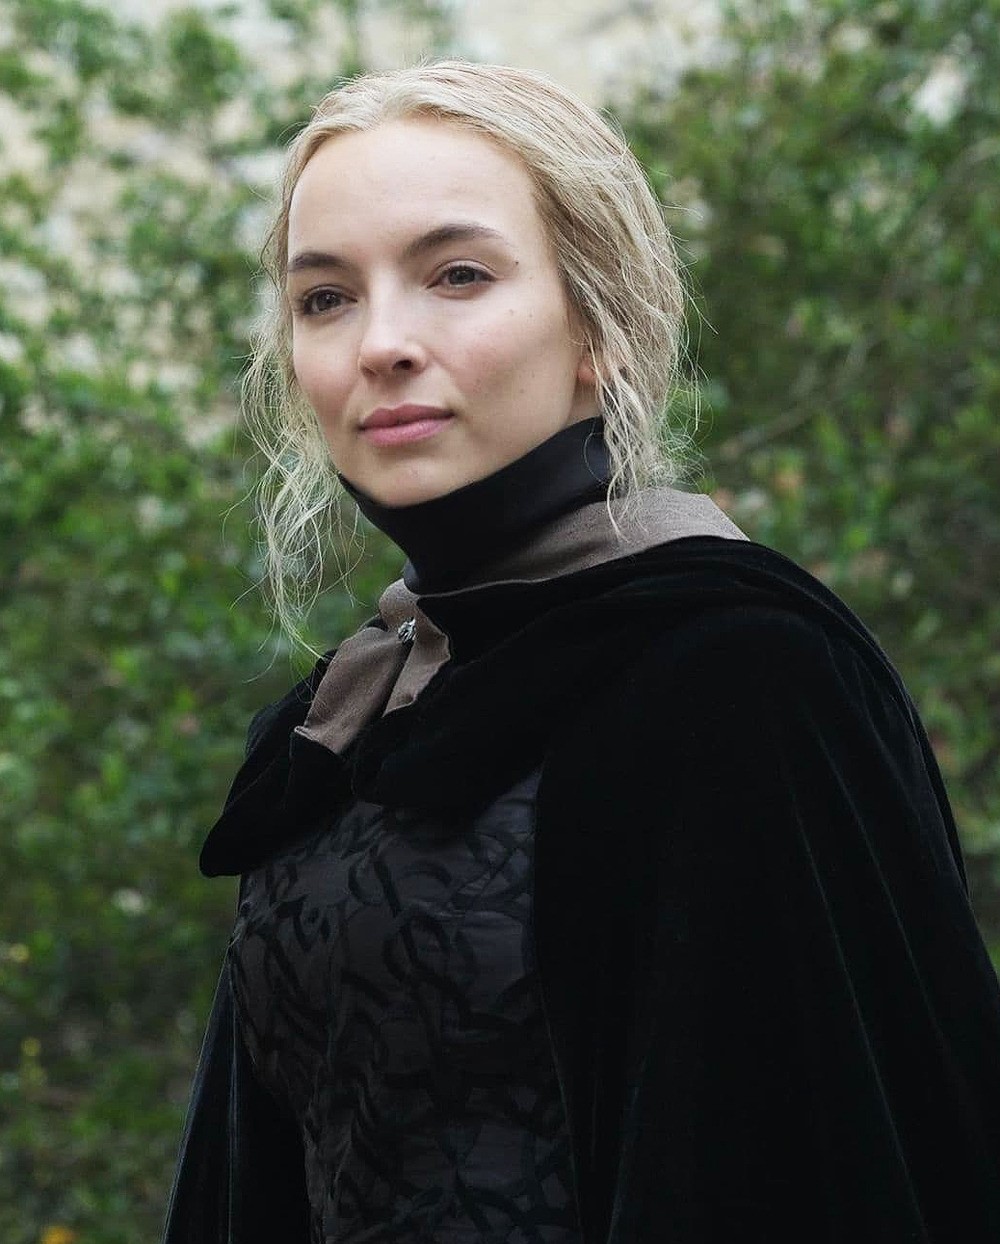 The Heirs of the Dragon, Game of Thrones Wiki